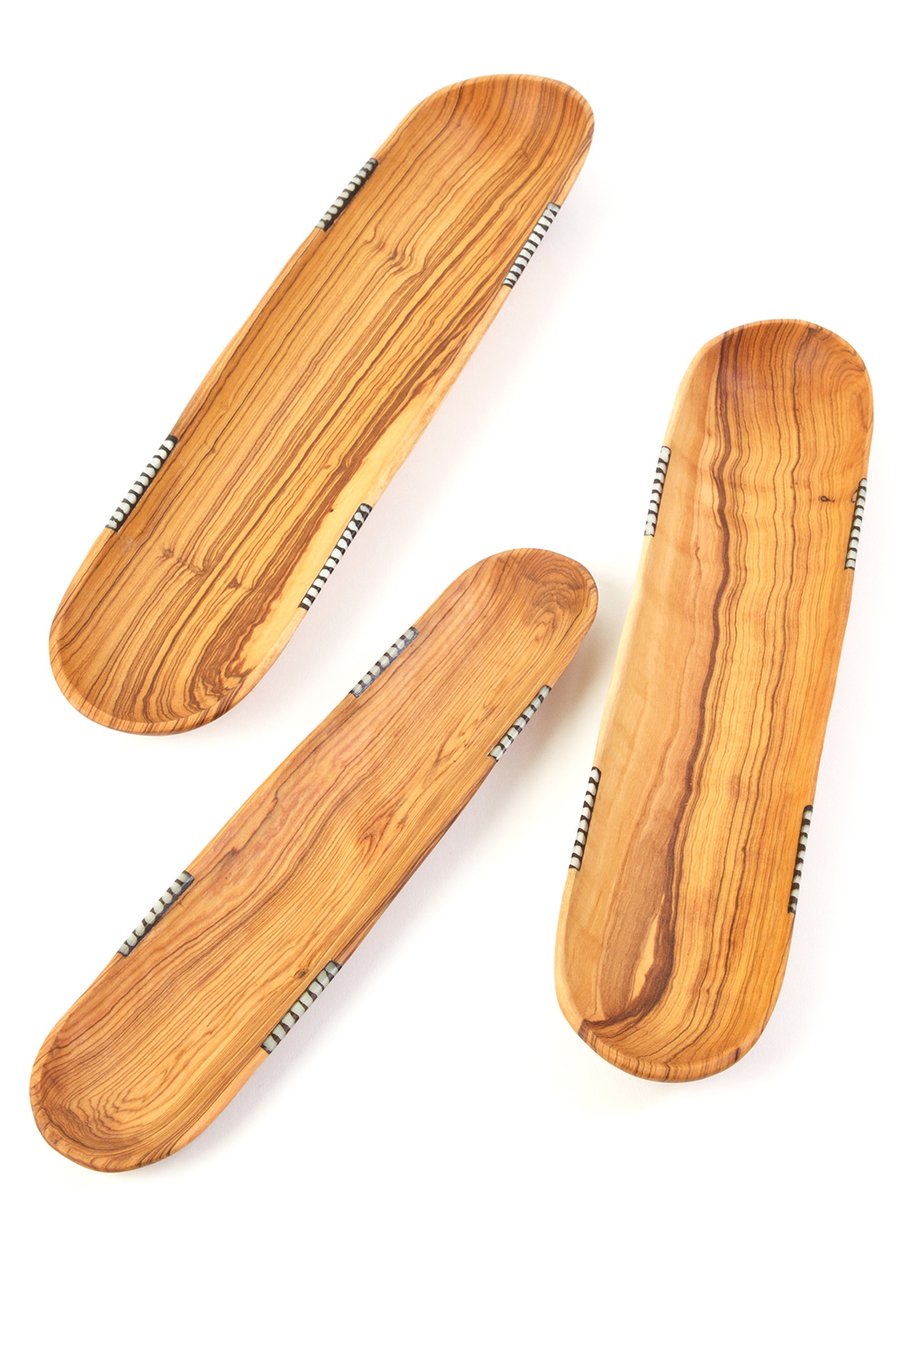 Wild Olive Wood Baguette Trays with Bone Inlay - Set of 3